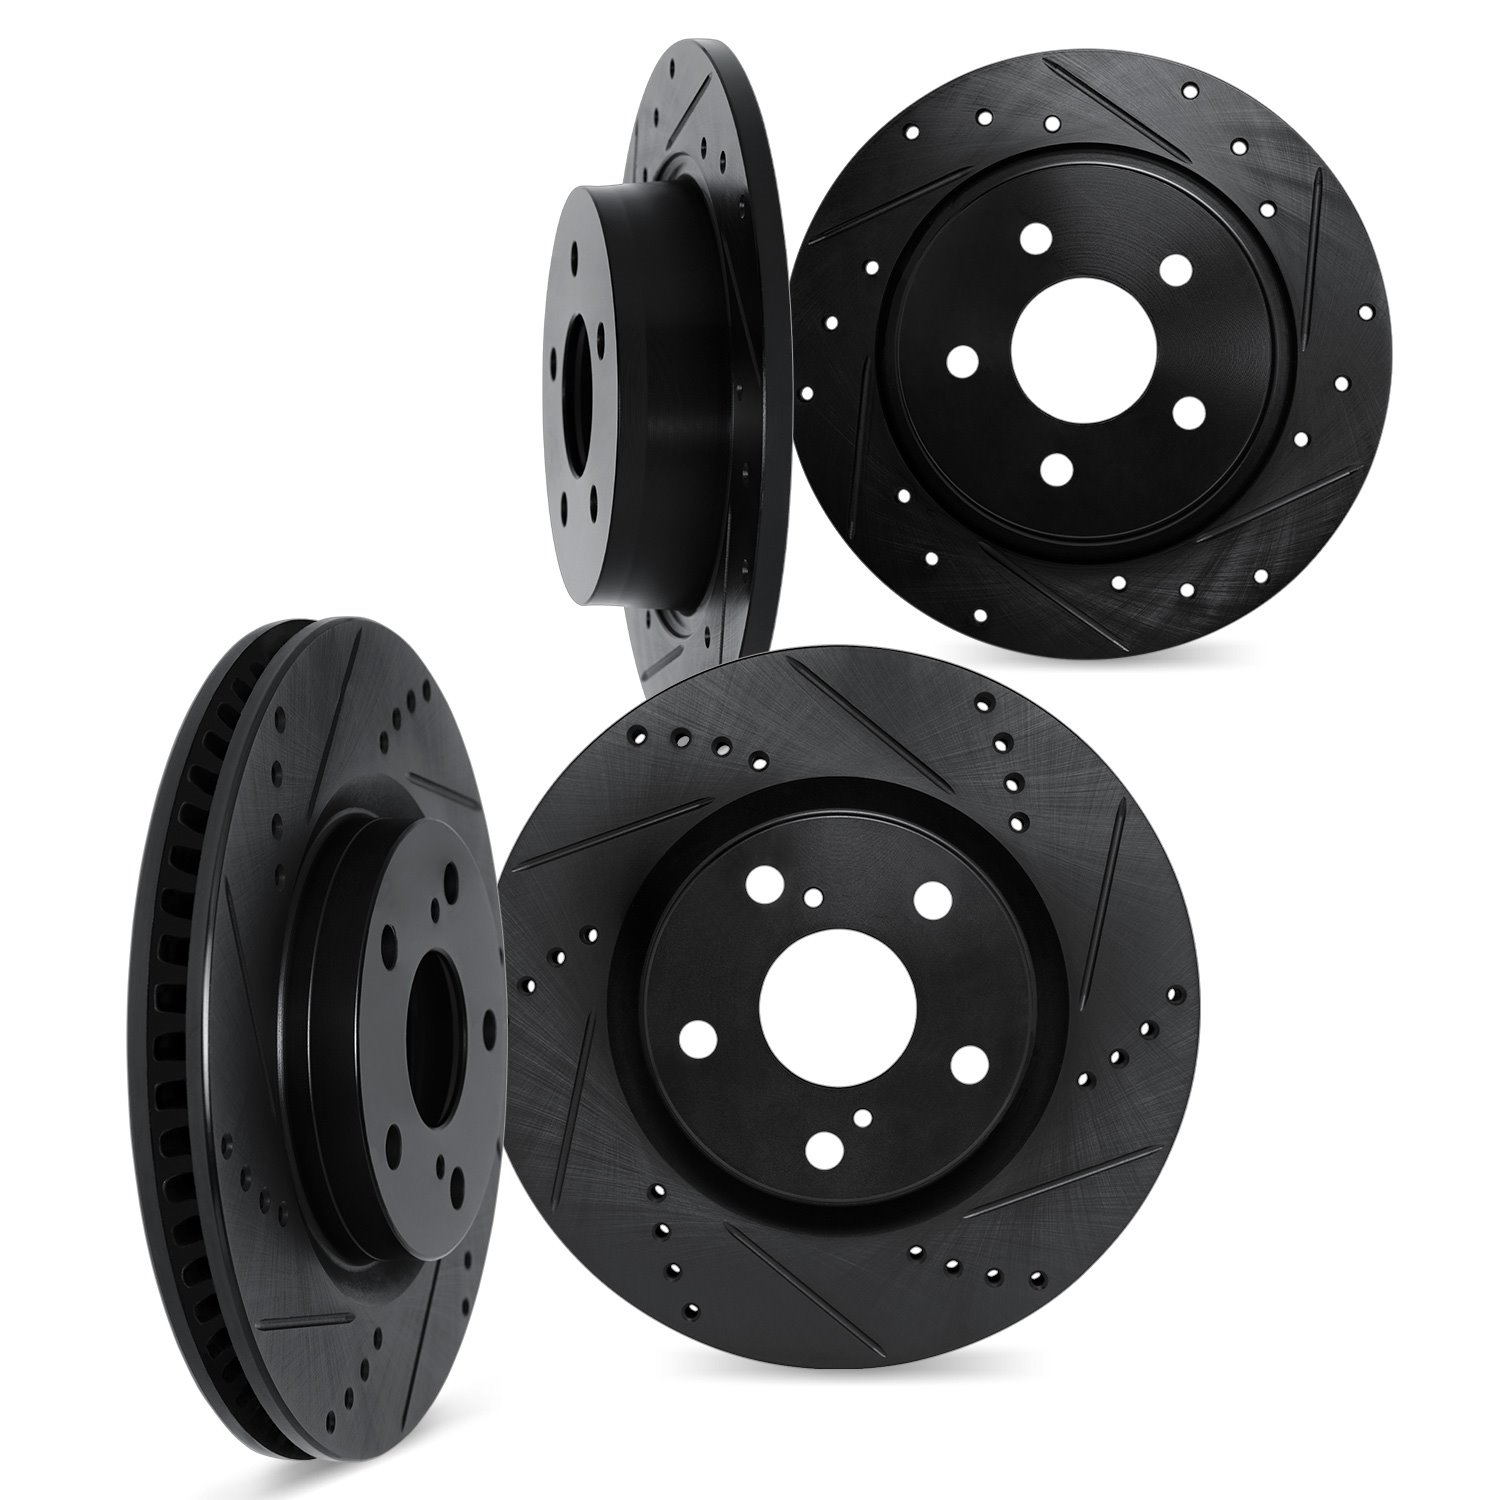 8004-32009 Drilled/Slotted Brake Rotors [Black], Fits Select Mini, Position: Front and Rear